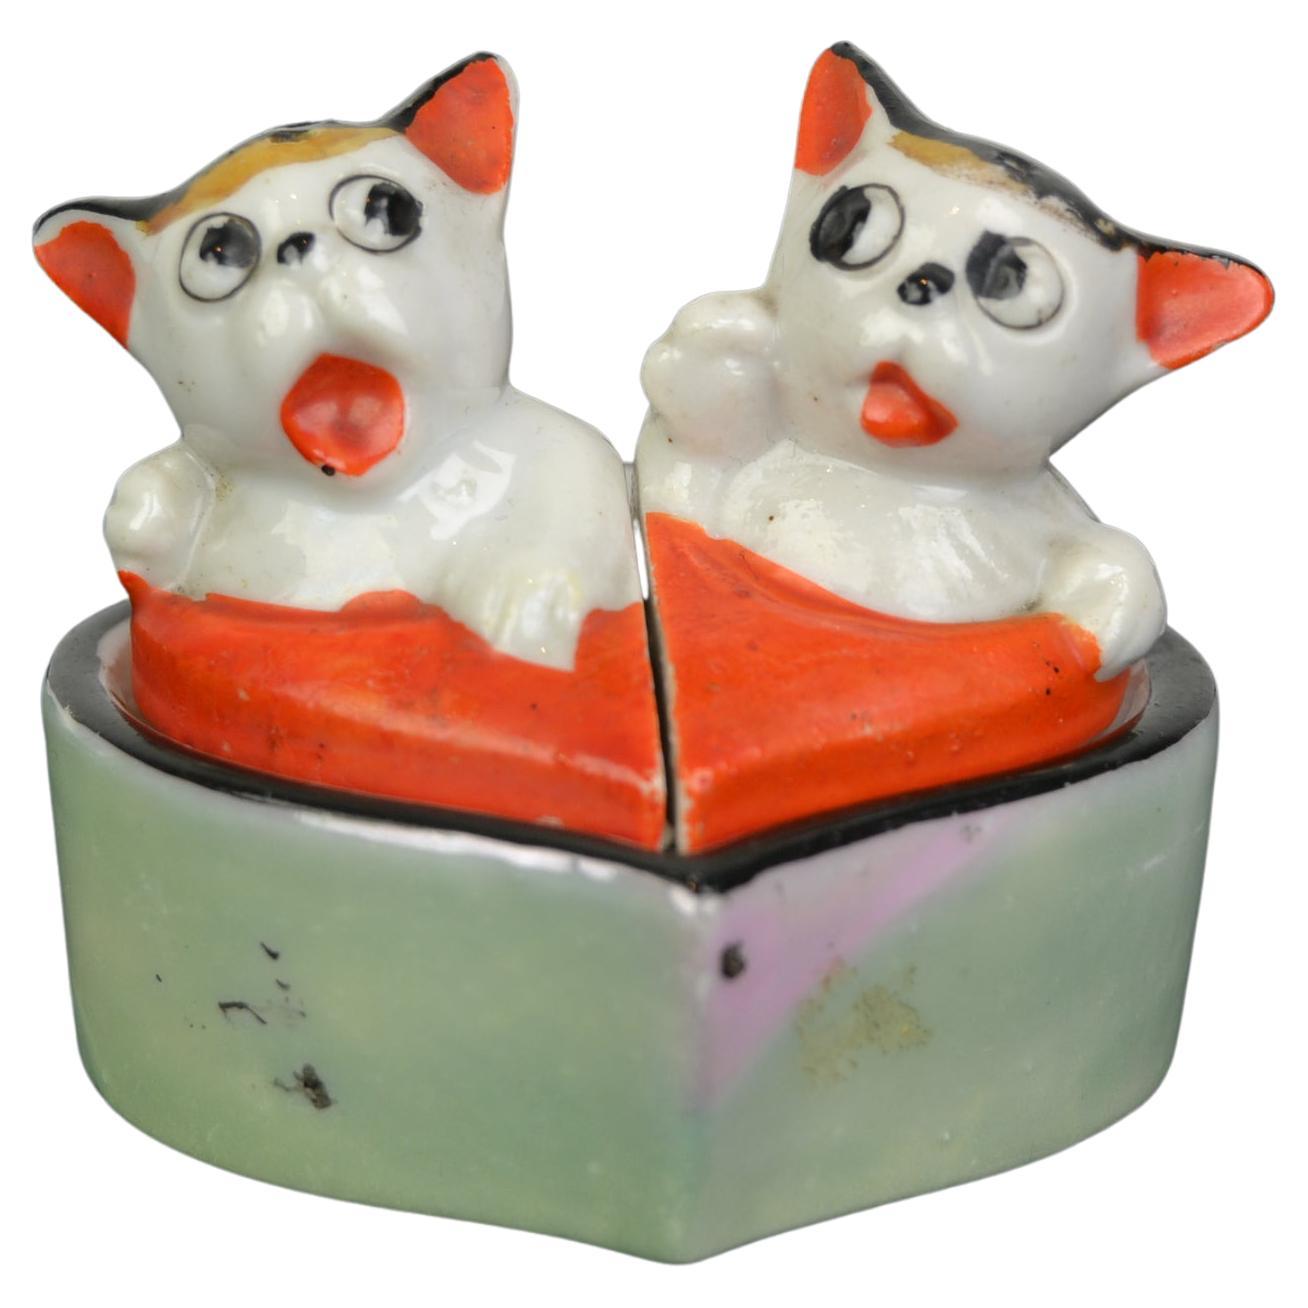 Cat Salt and Pepper Shakers and Mustard Pot by Klimax